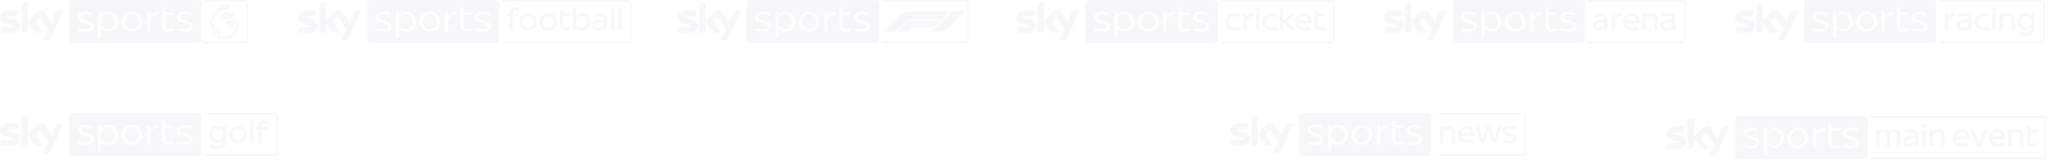 sky sports box office on xbox one